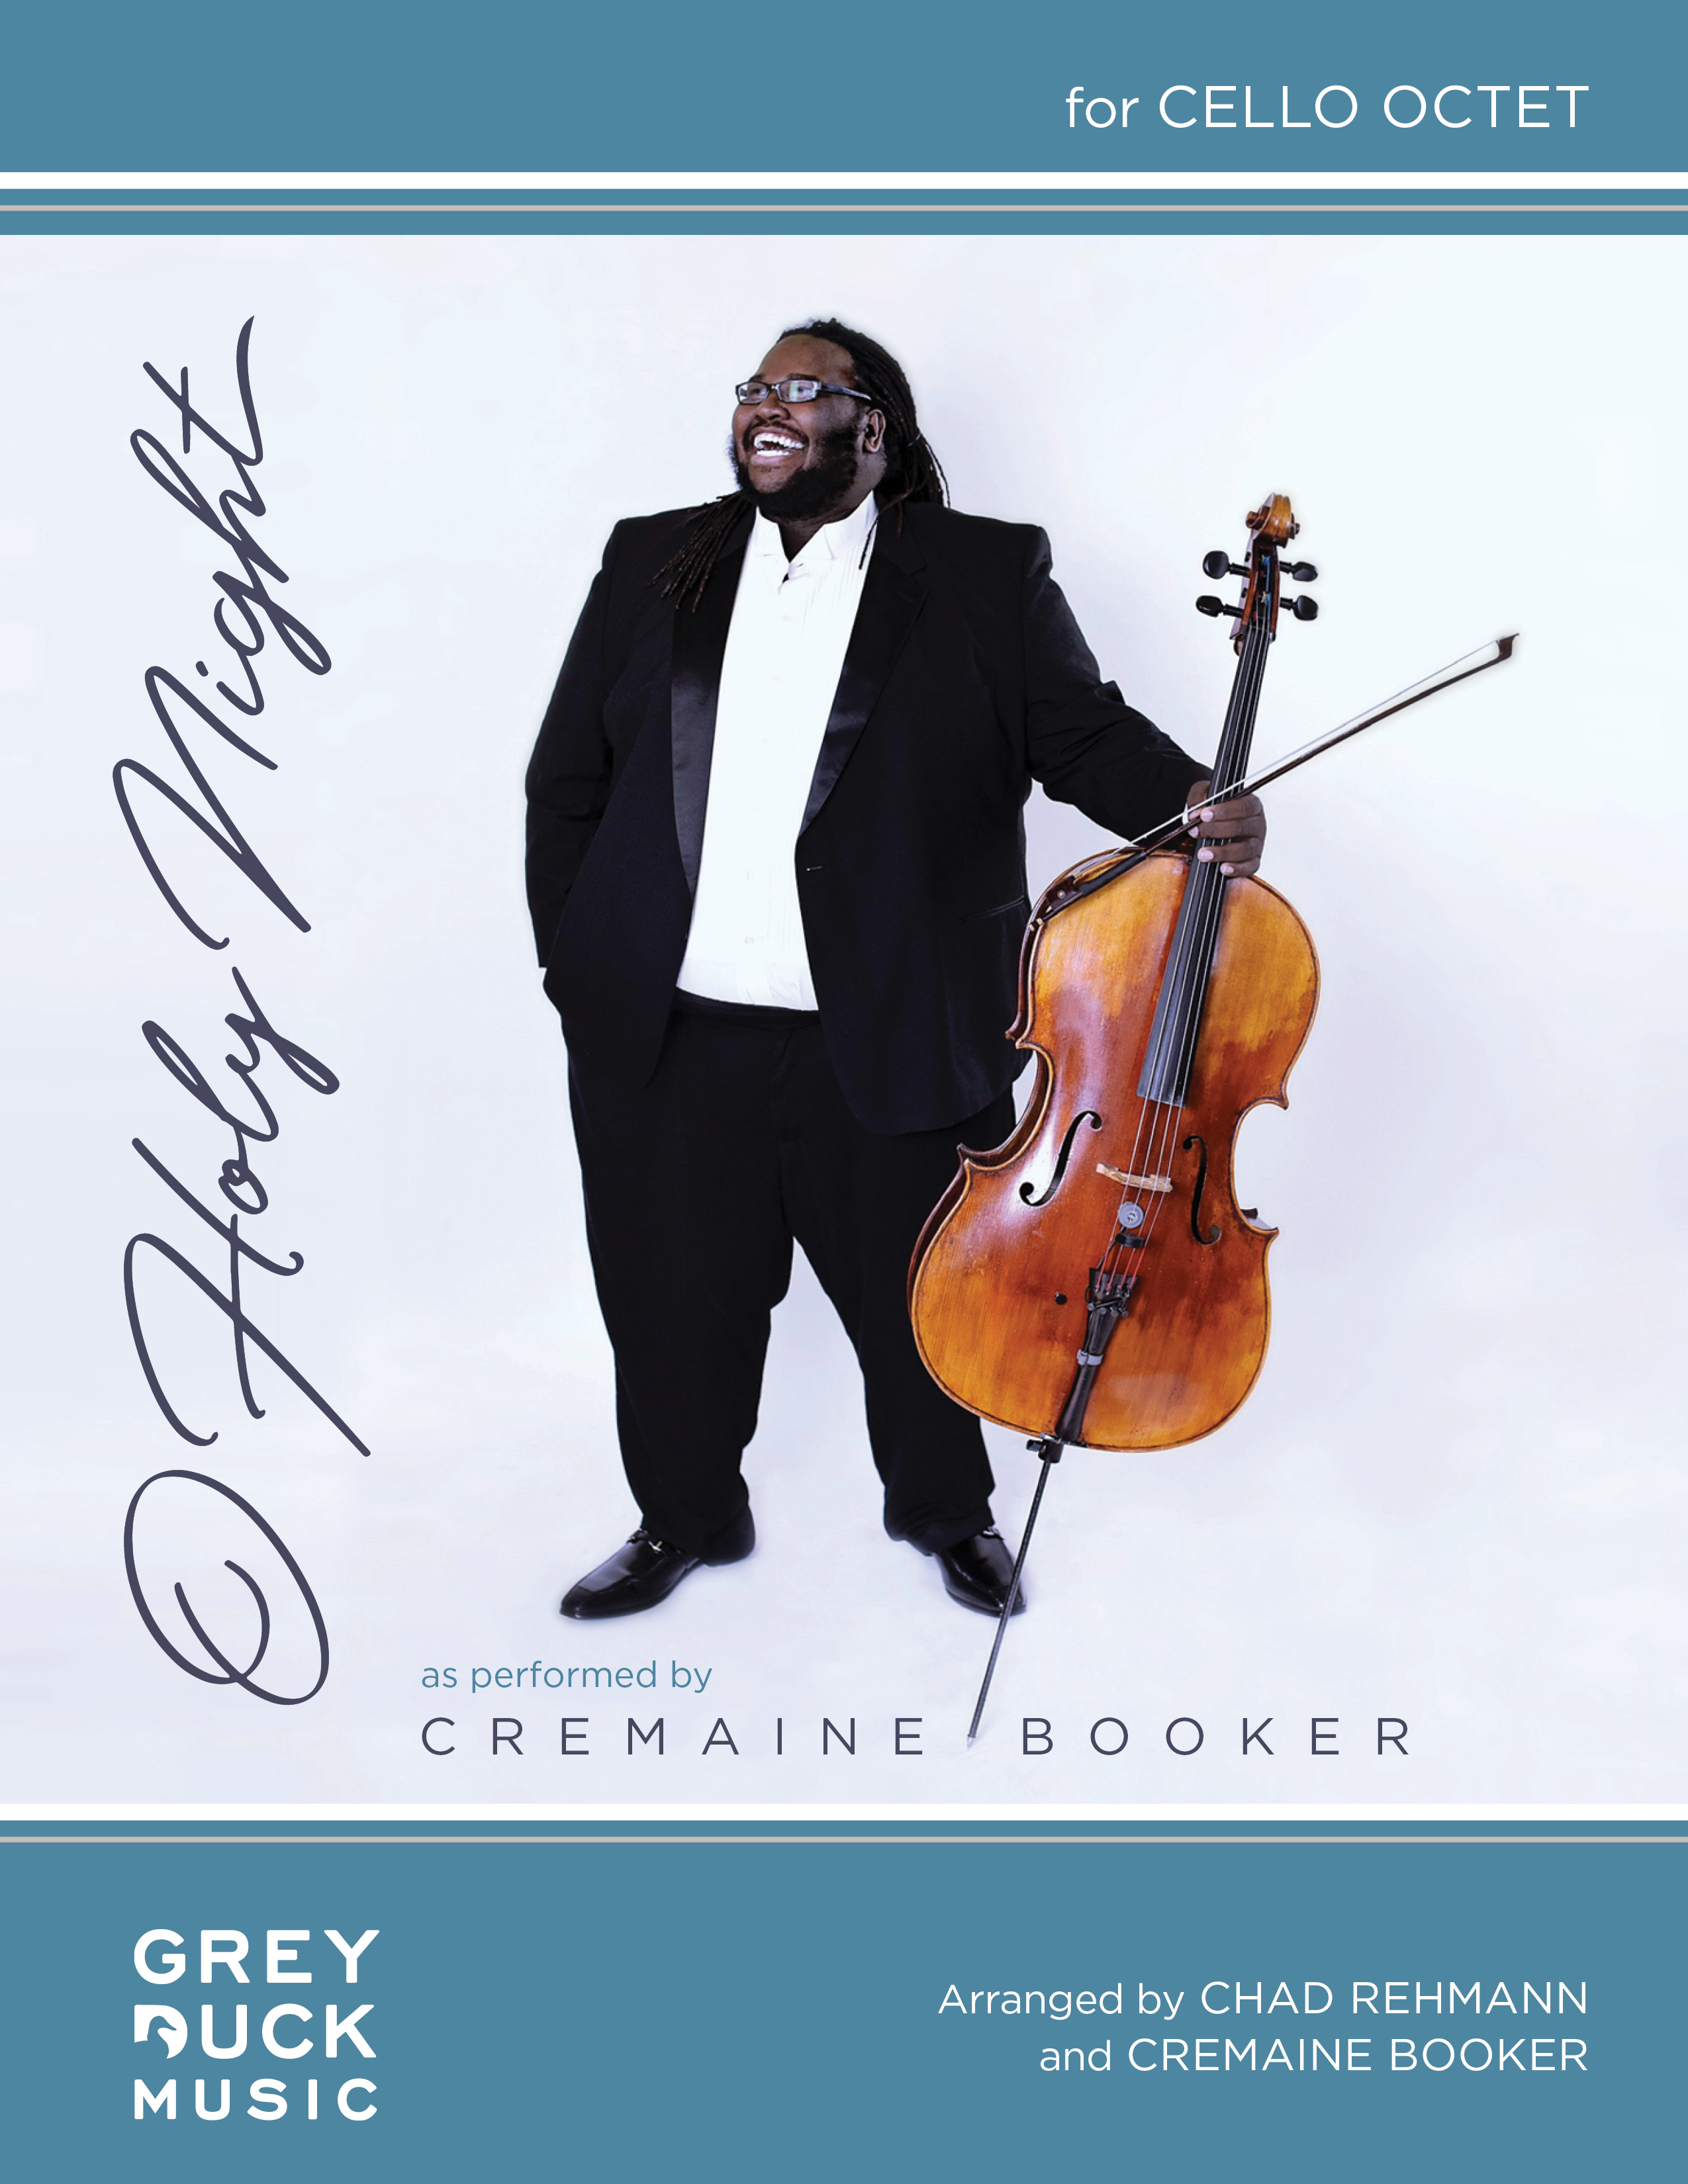 Sheet music cover design; also used on iTunes cover